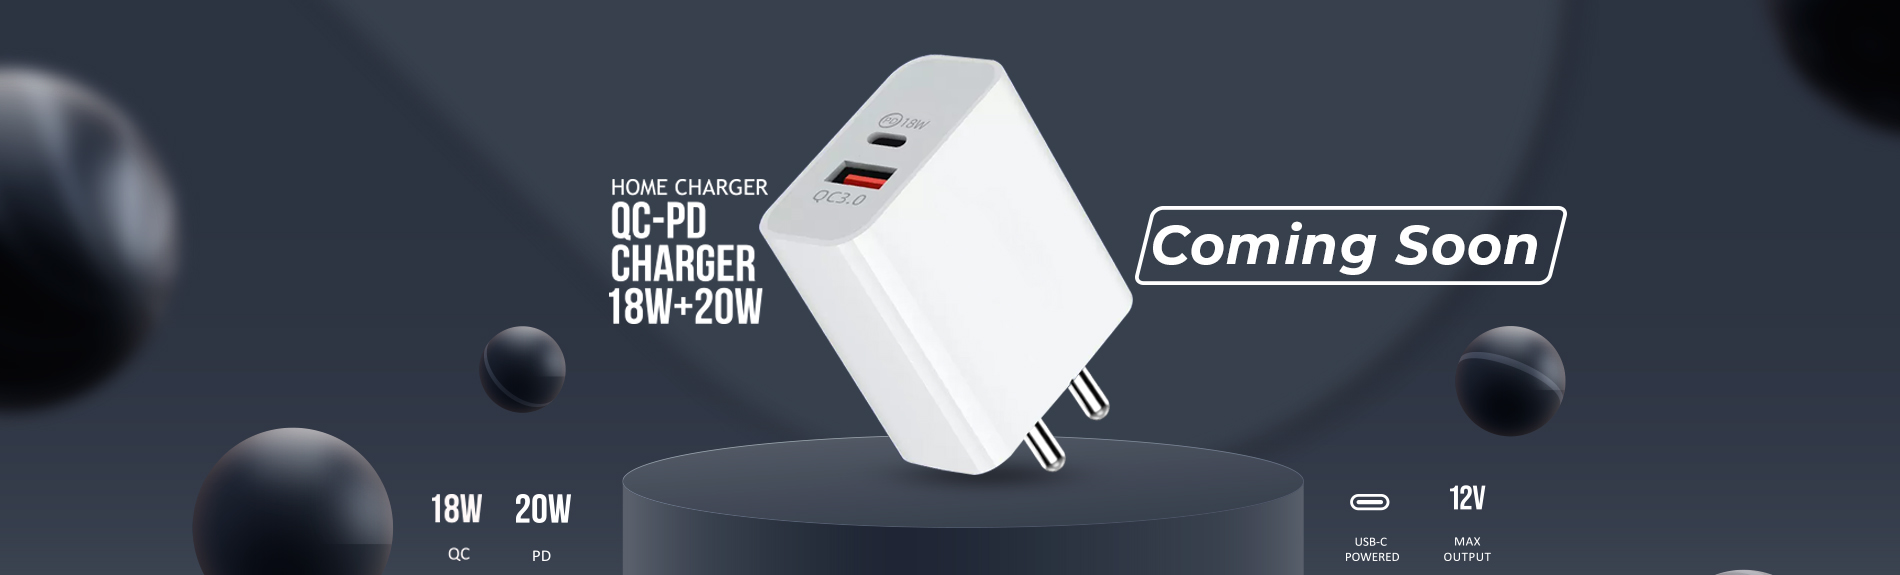 QC+PD Charger avail soon to order